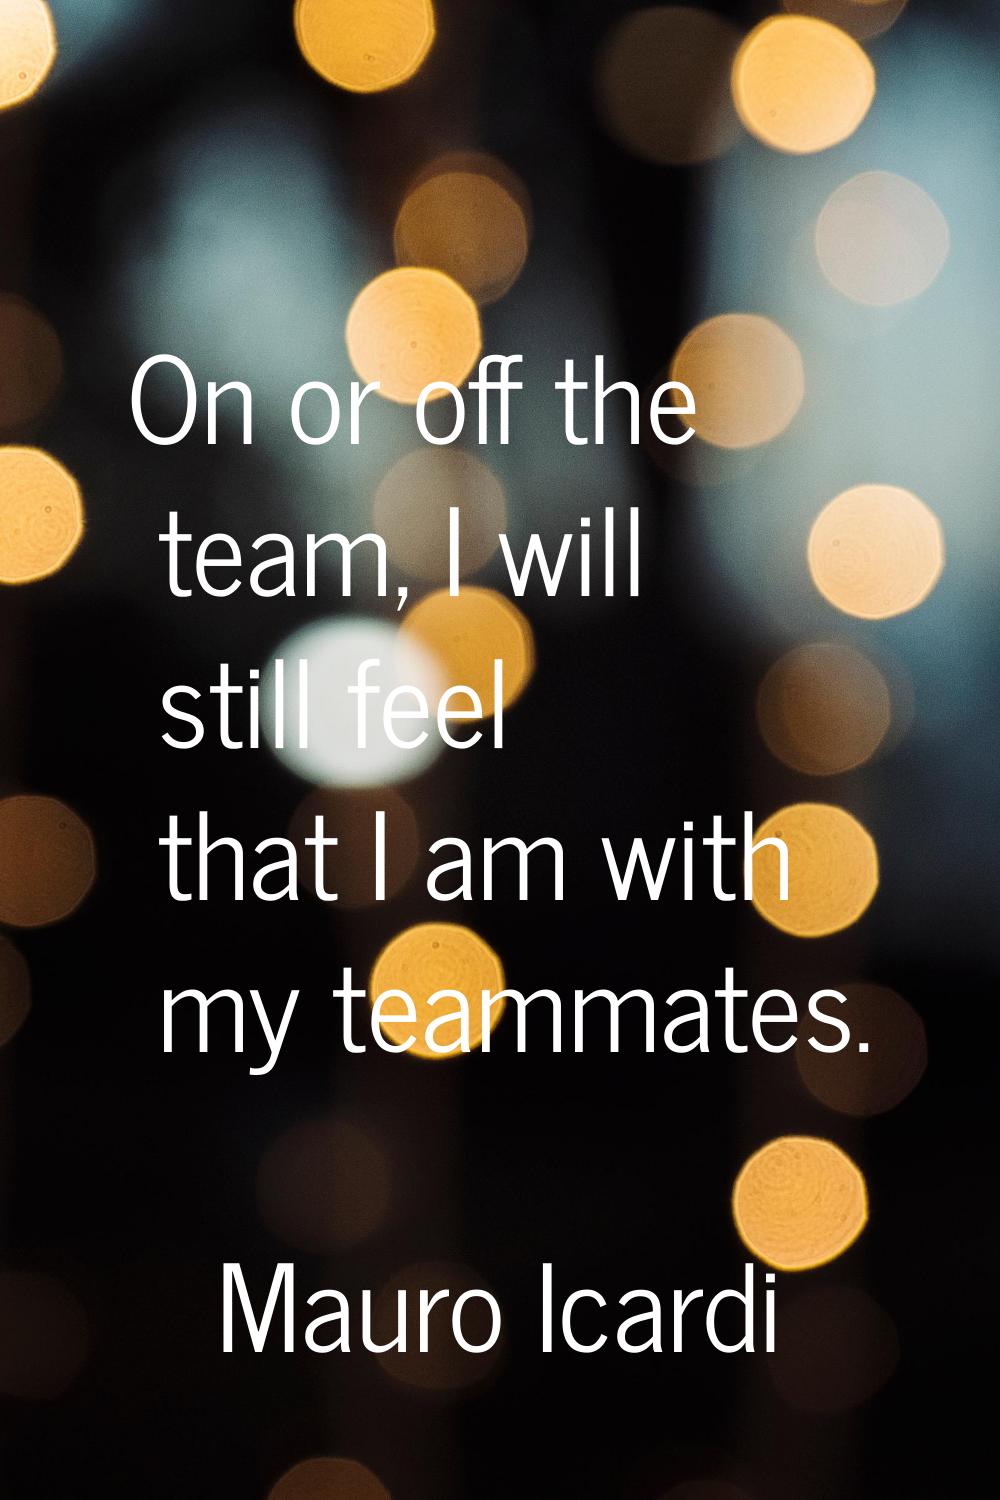 On or off the team, I will still feel that I am with my teammates.